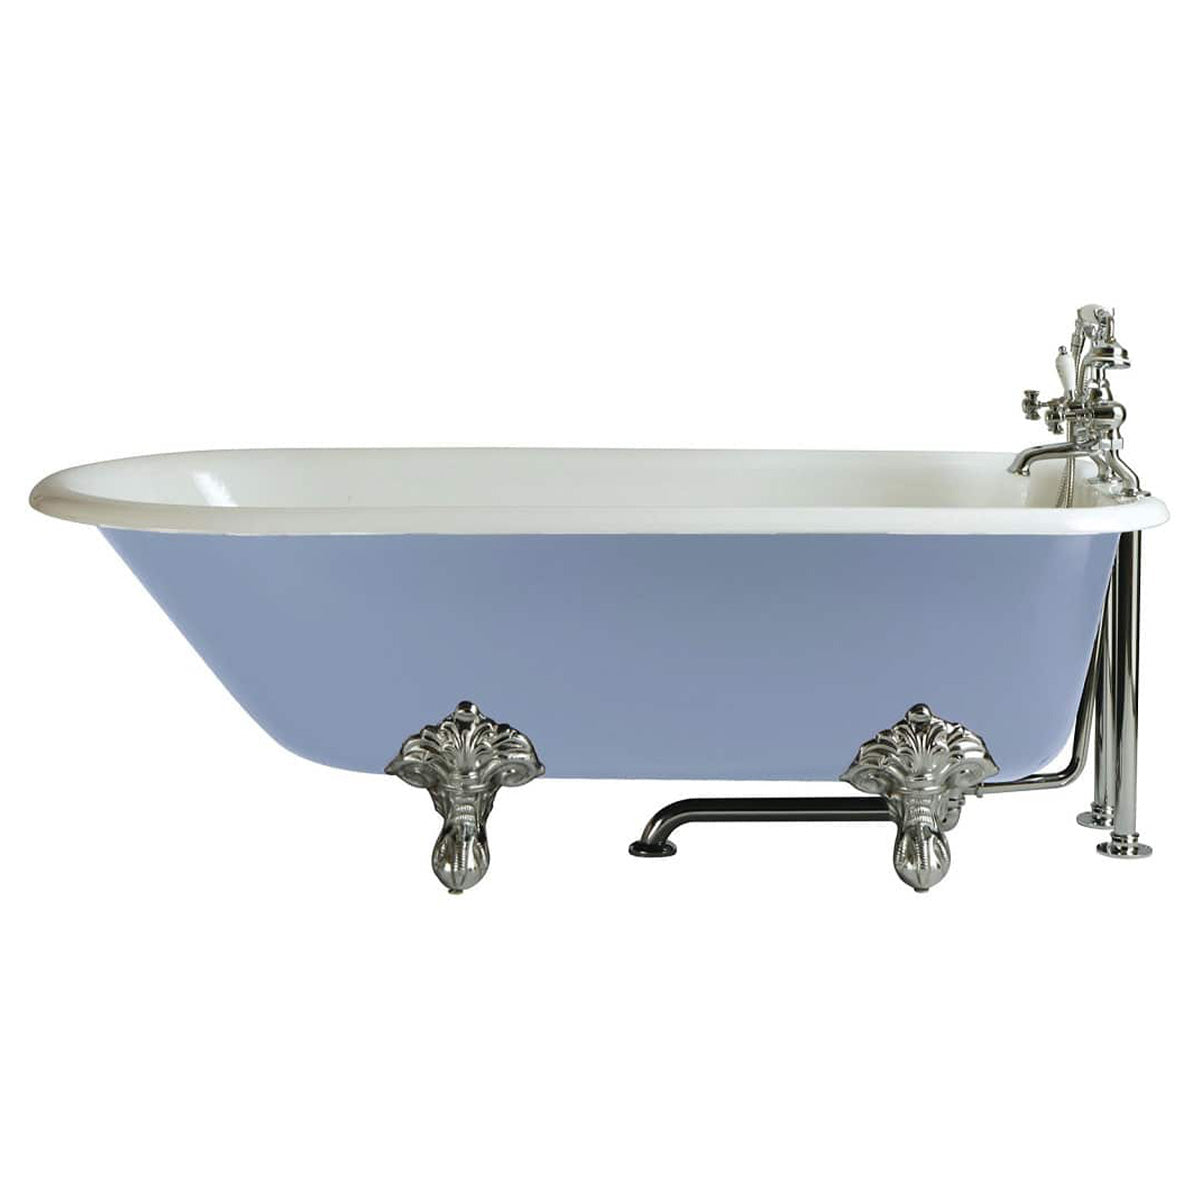 Heritage Essex Single Ended Cast Iron Freestanding Bath 1700x700mm